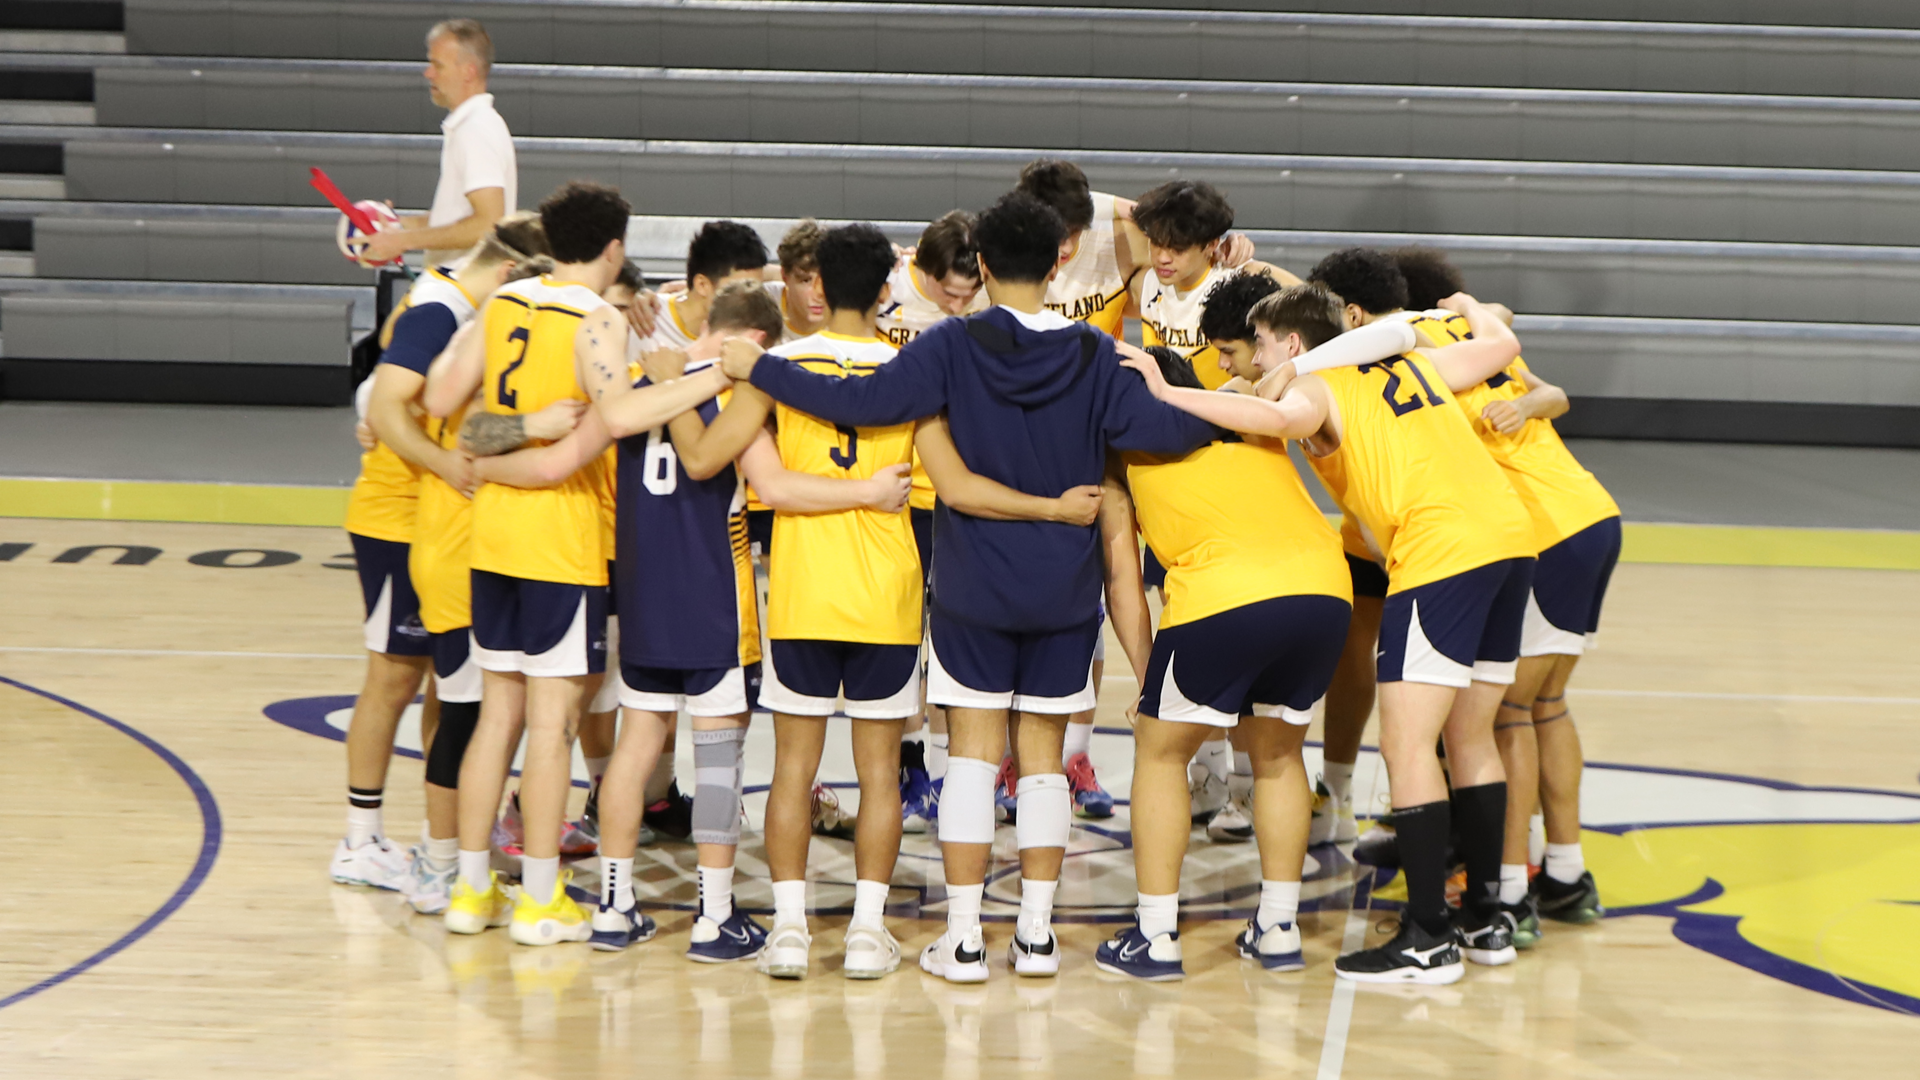 Men’s Volleyball Clipped by No. 2 Park